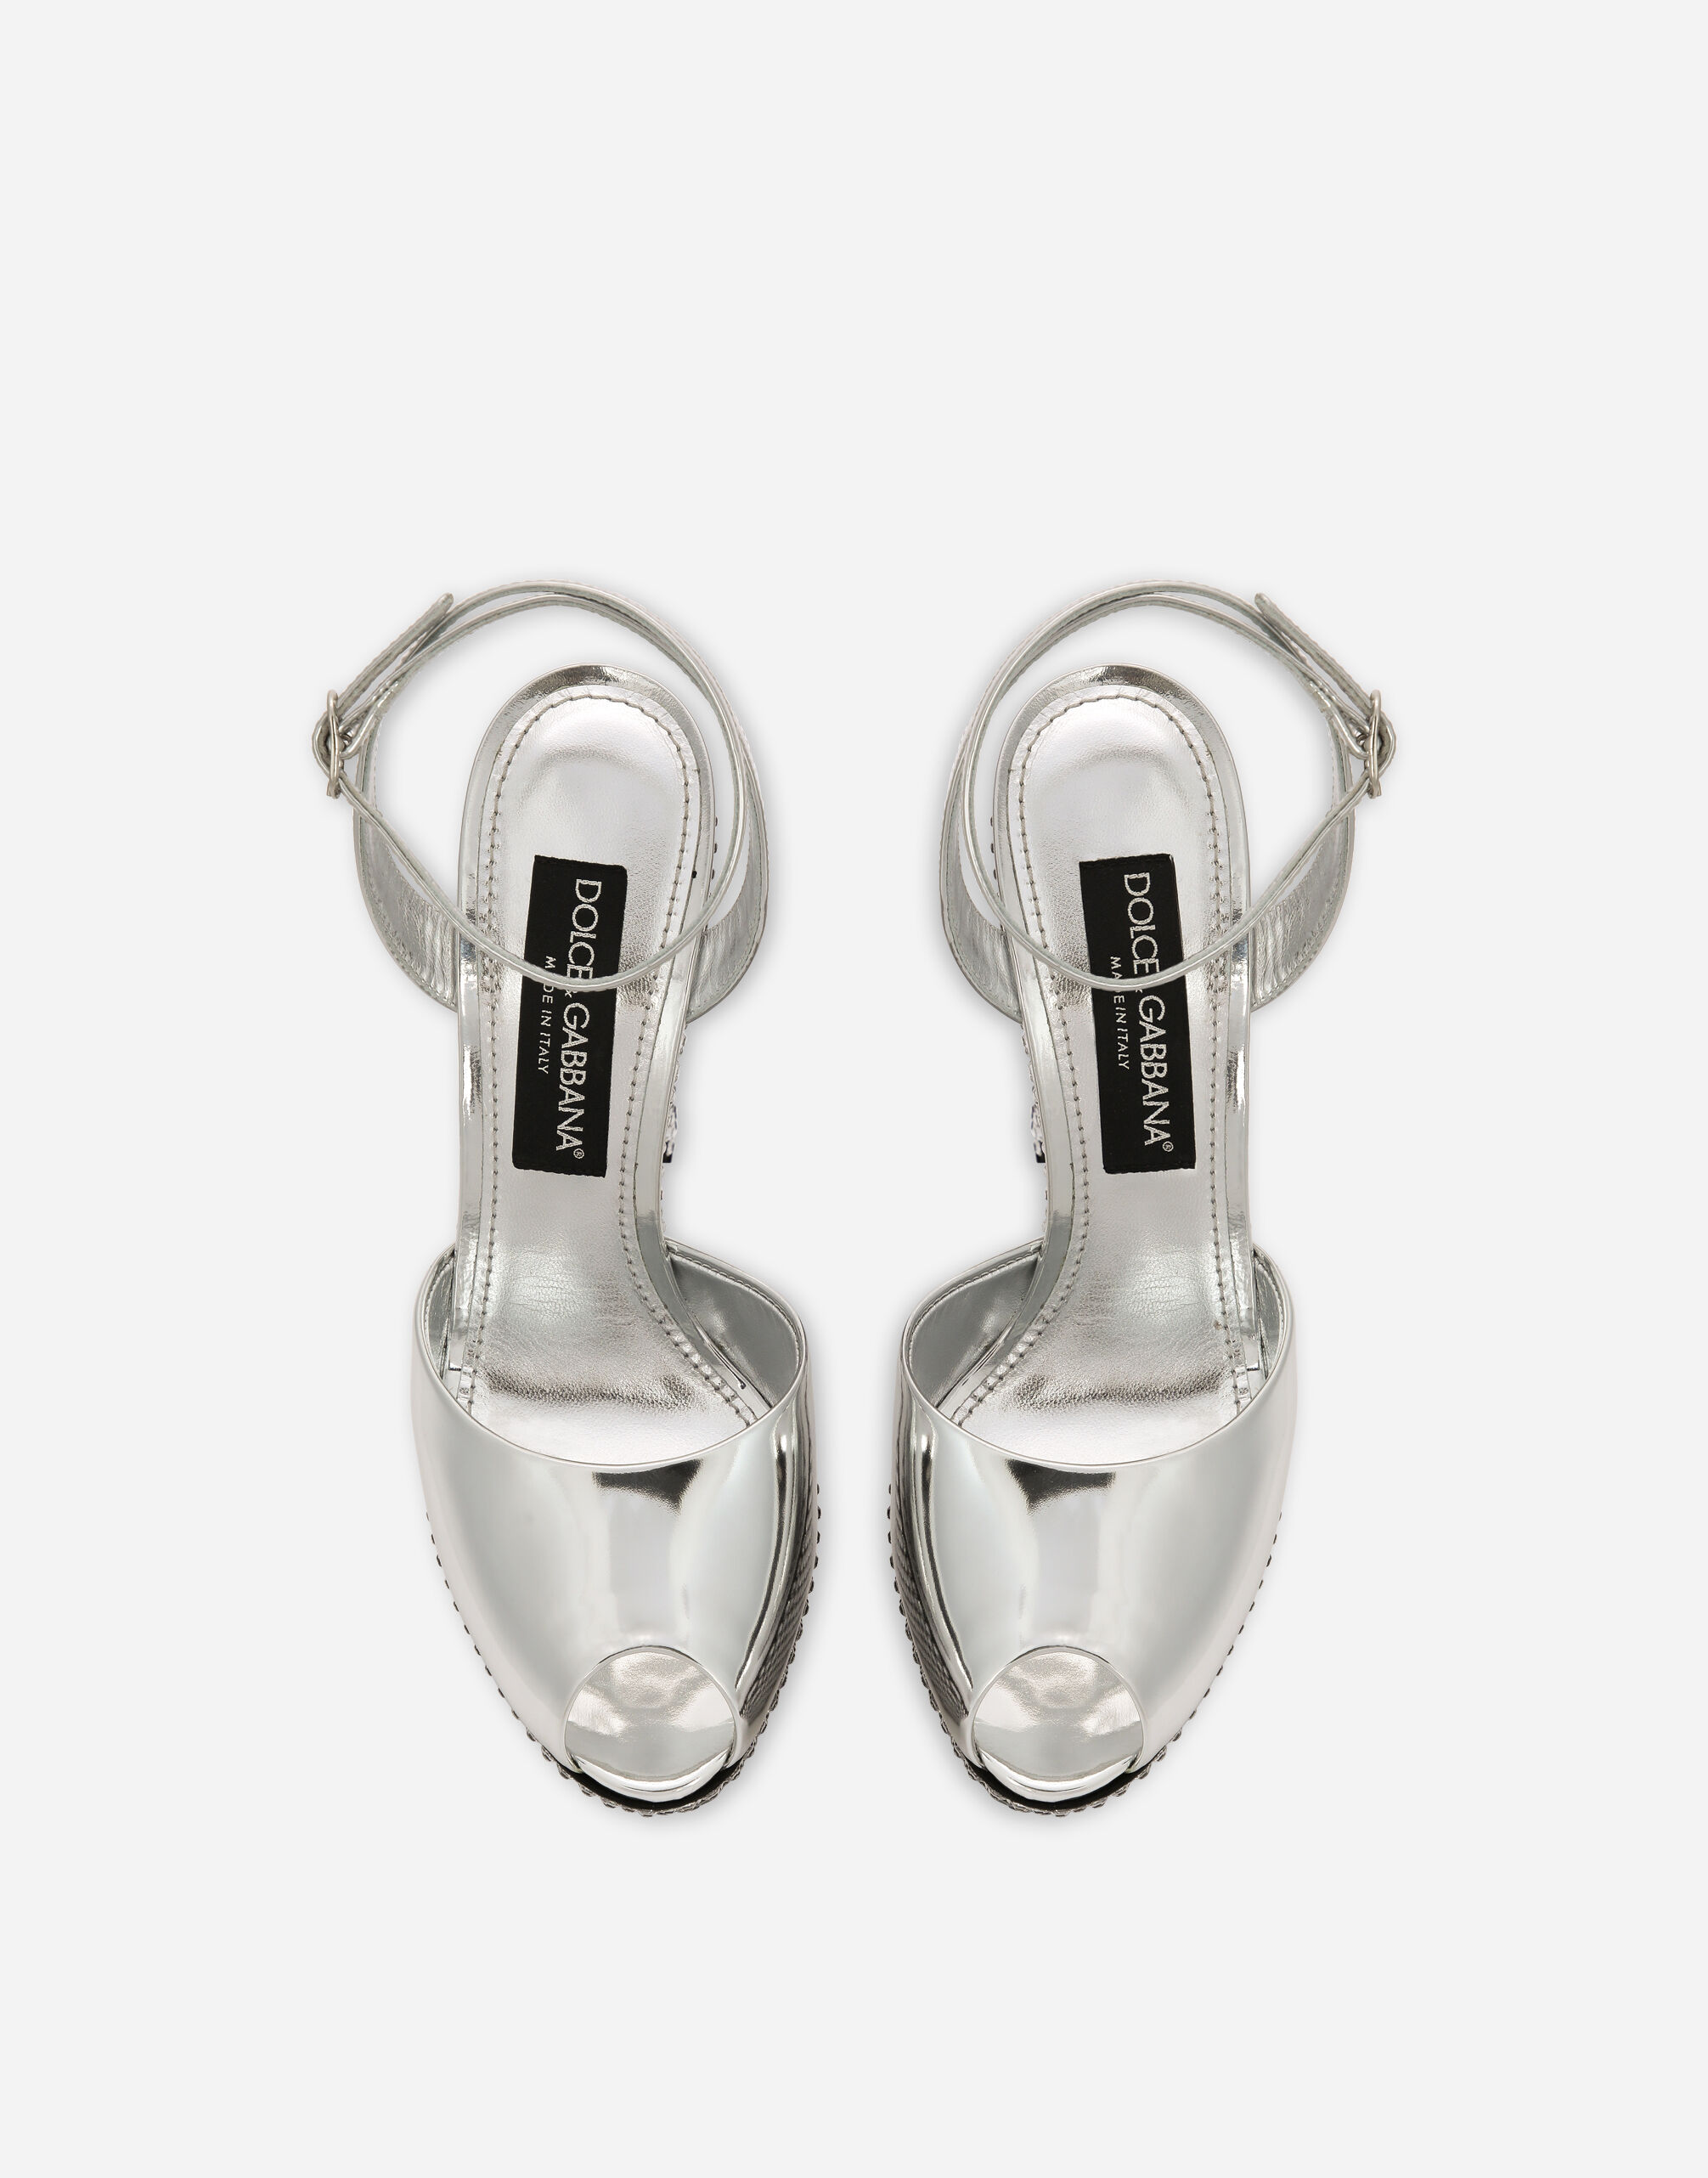 Mirrored-effect calfskin platforms with fusible rhinestones in 